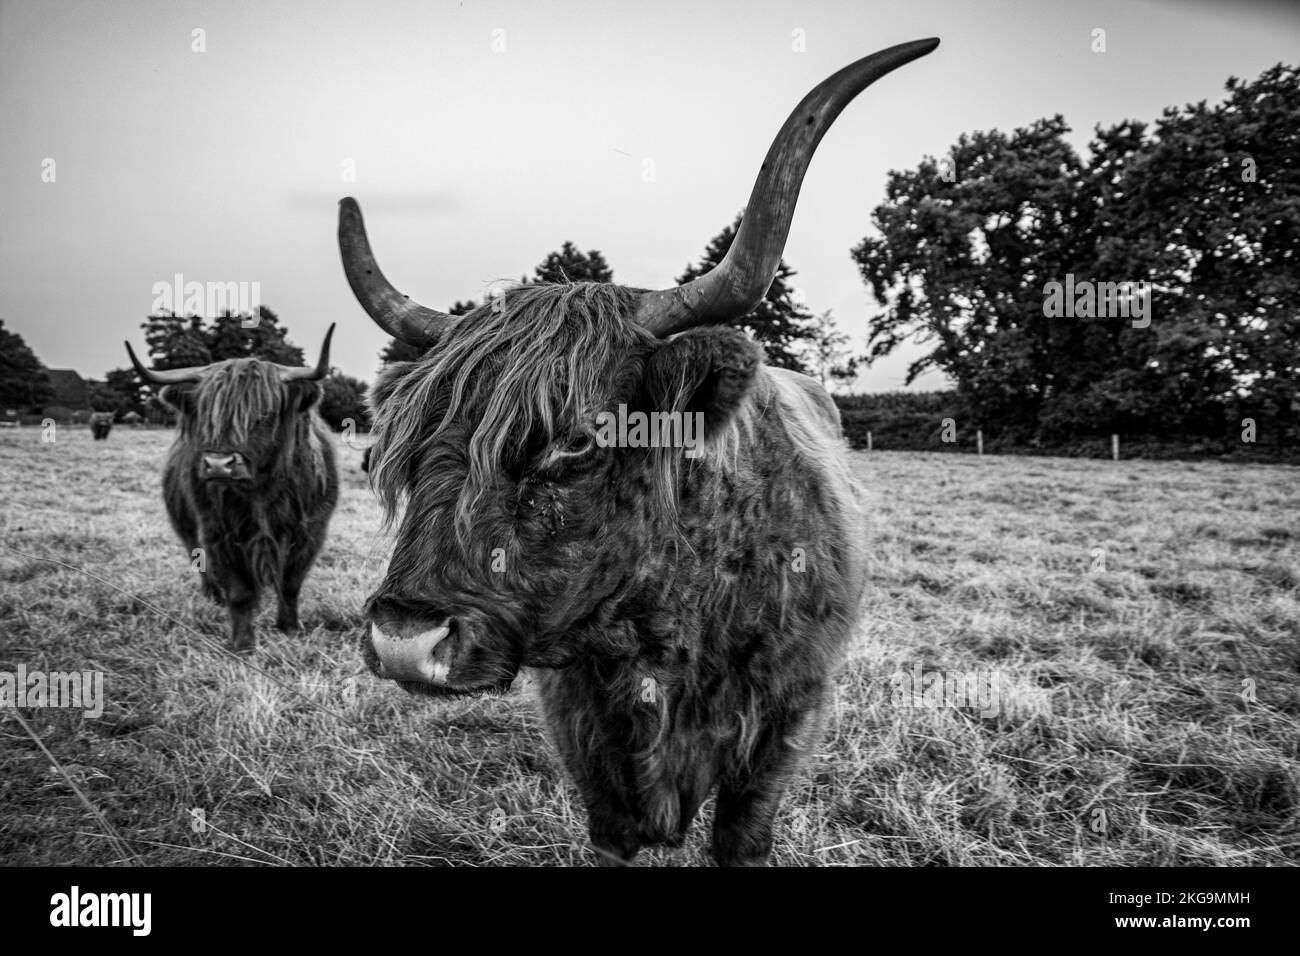 A grayscale of a Highland cow (Bos Taurus Taurus) with long horns and a long shaggy coat in a pasture Stock Photo